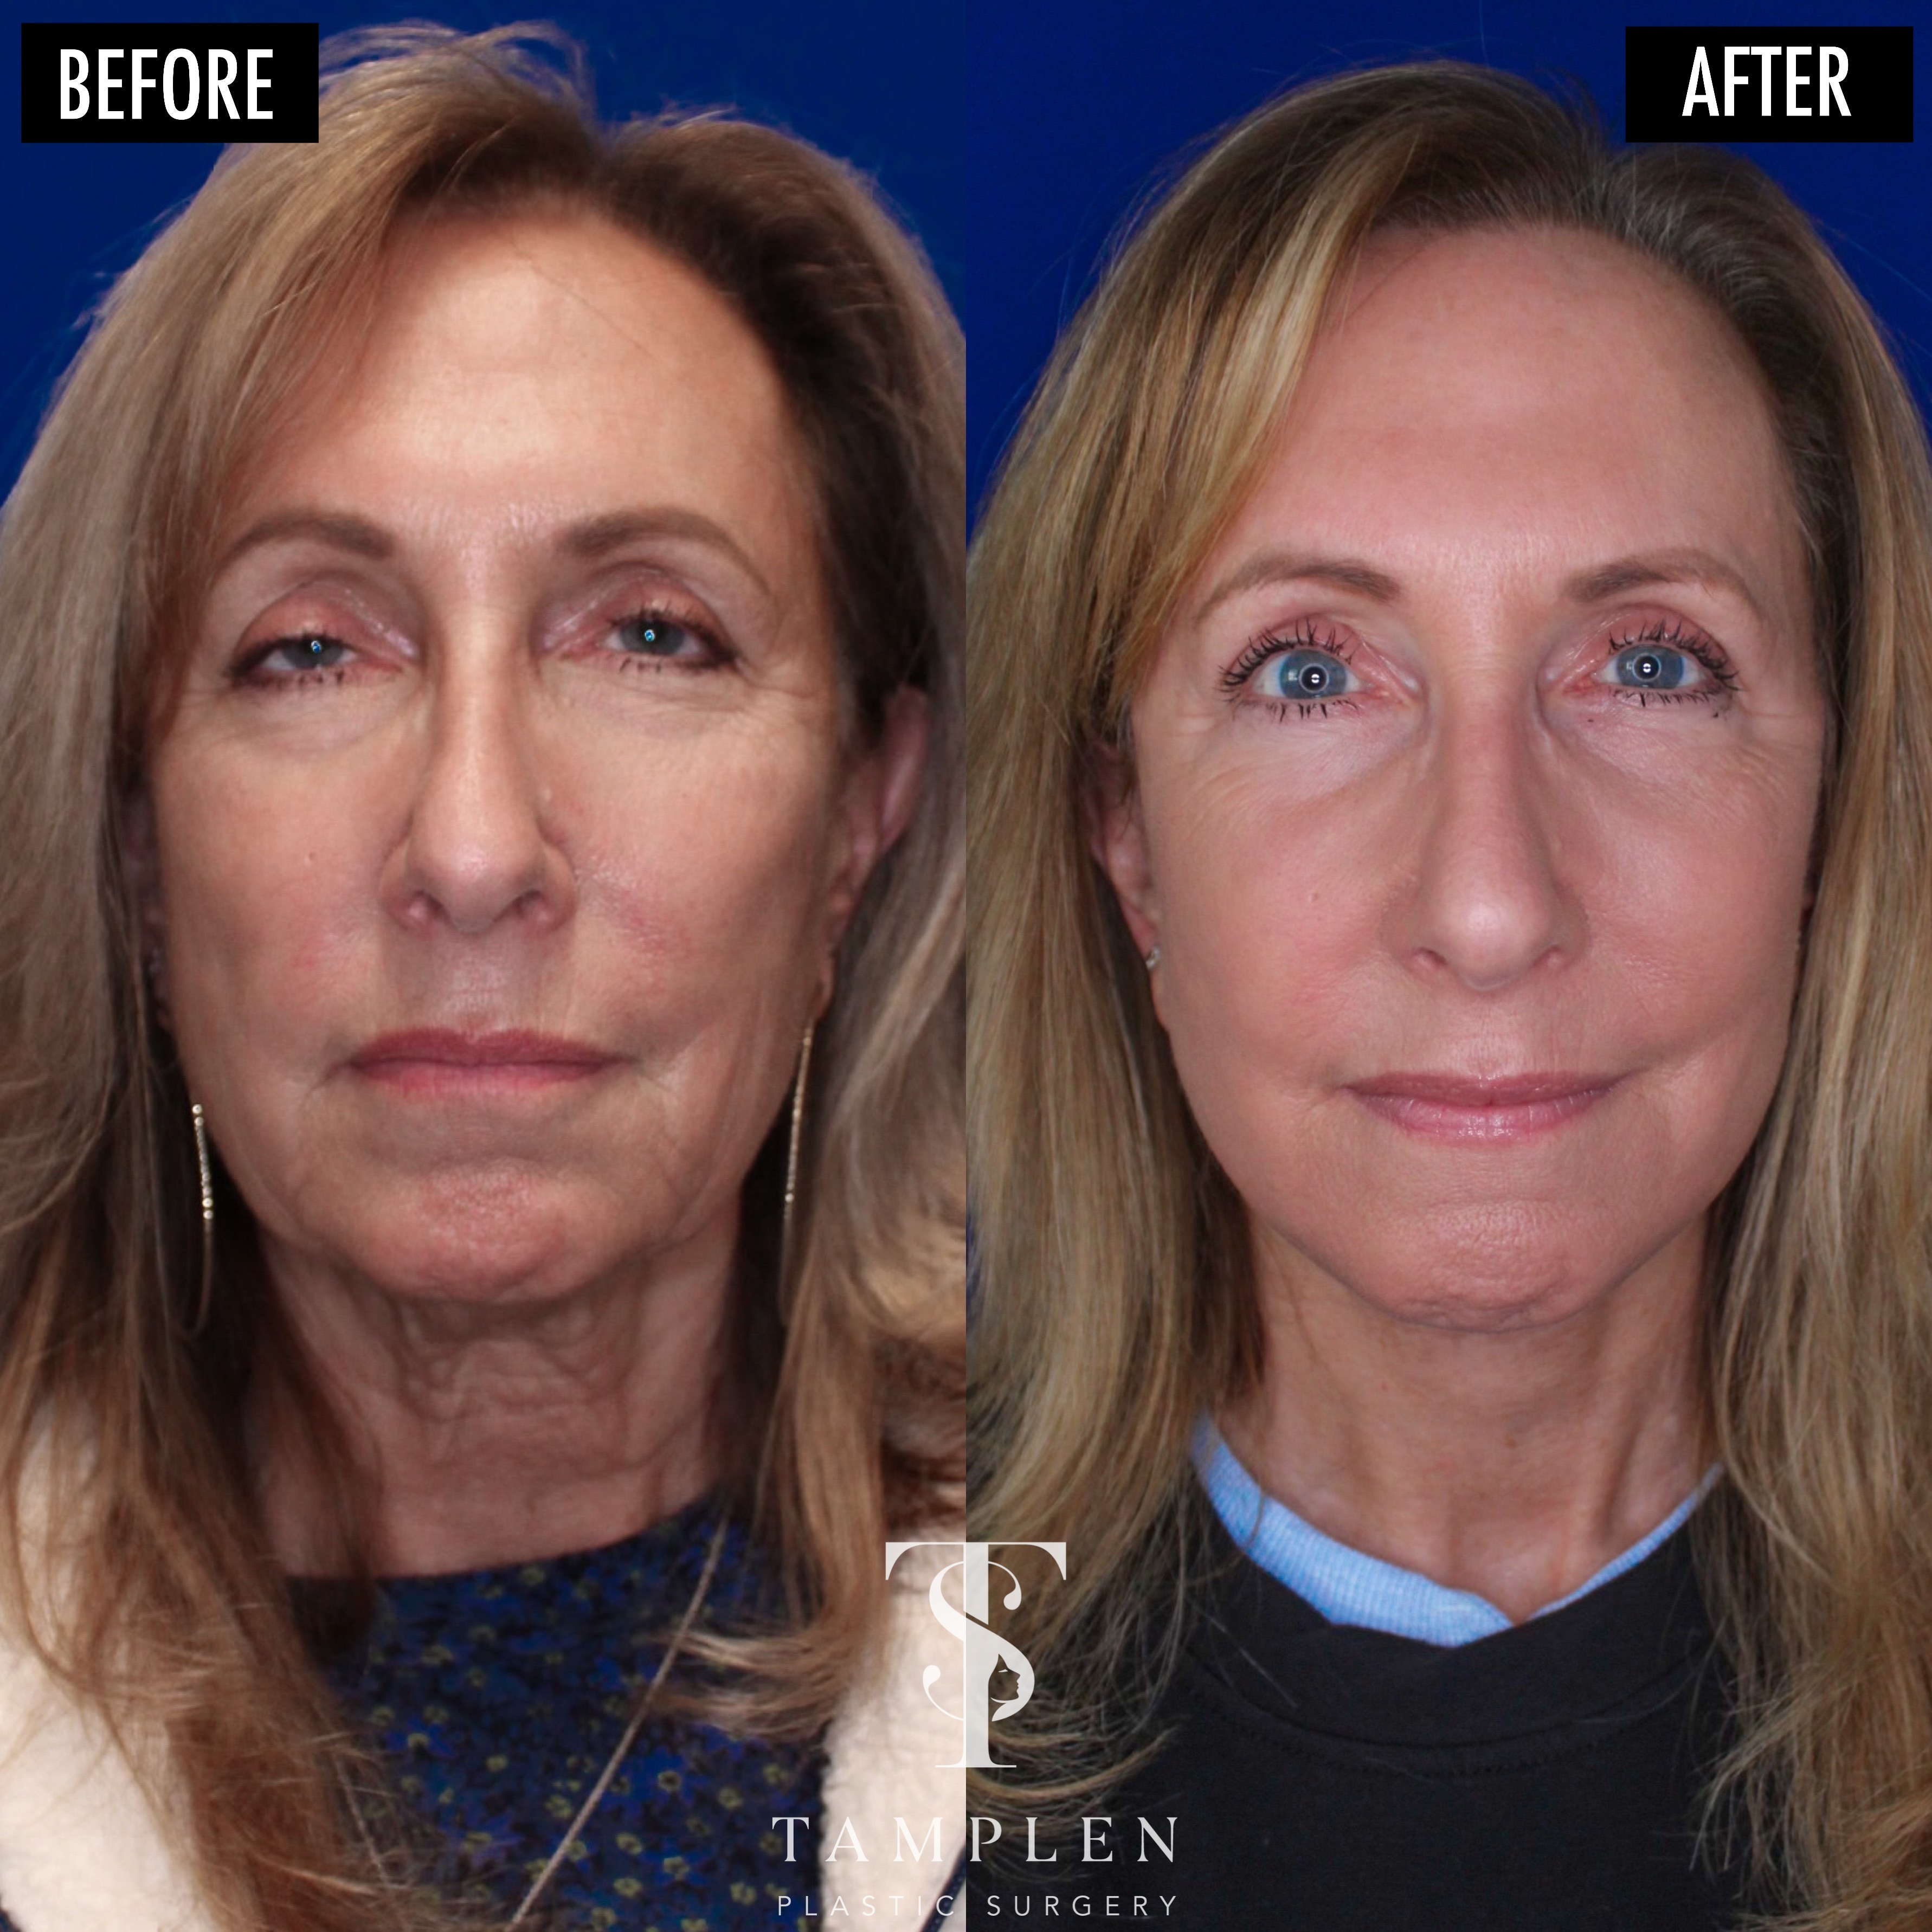 Tamplen Plastic Surgery Before & After Image